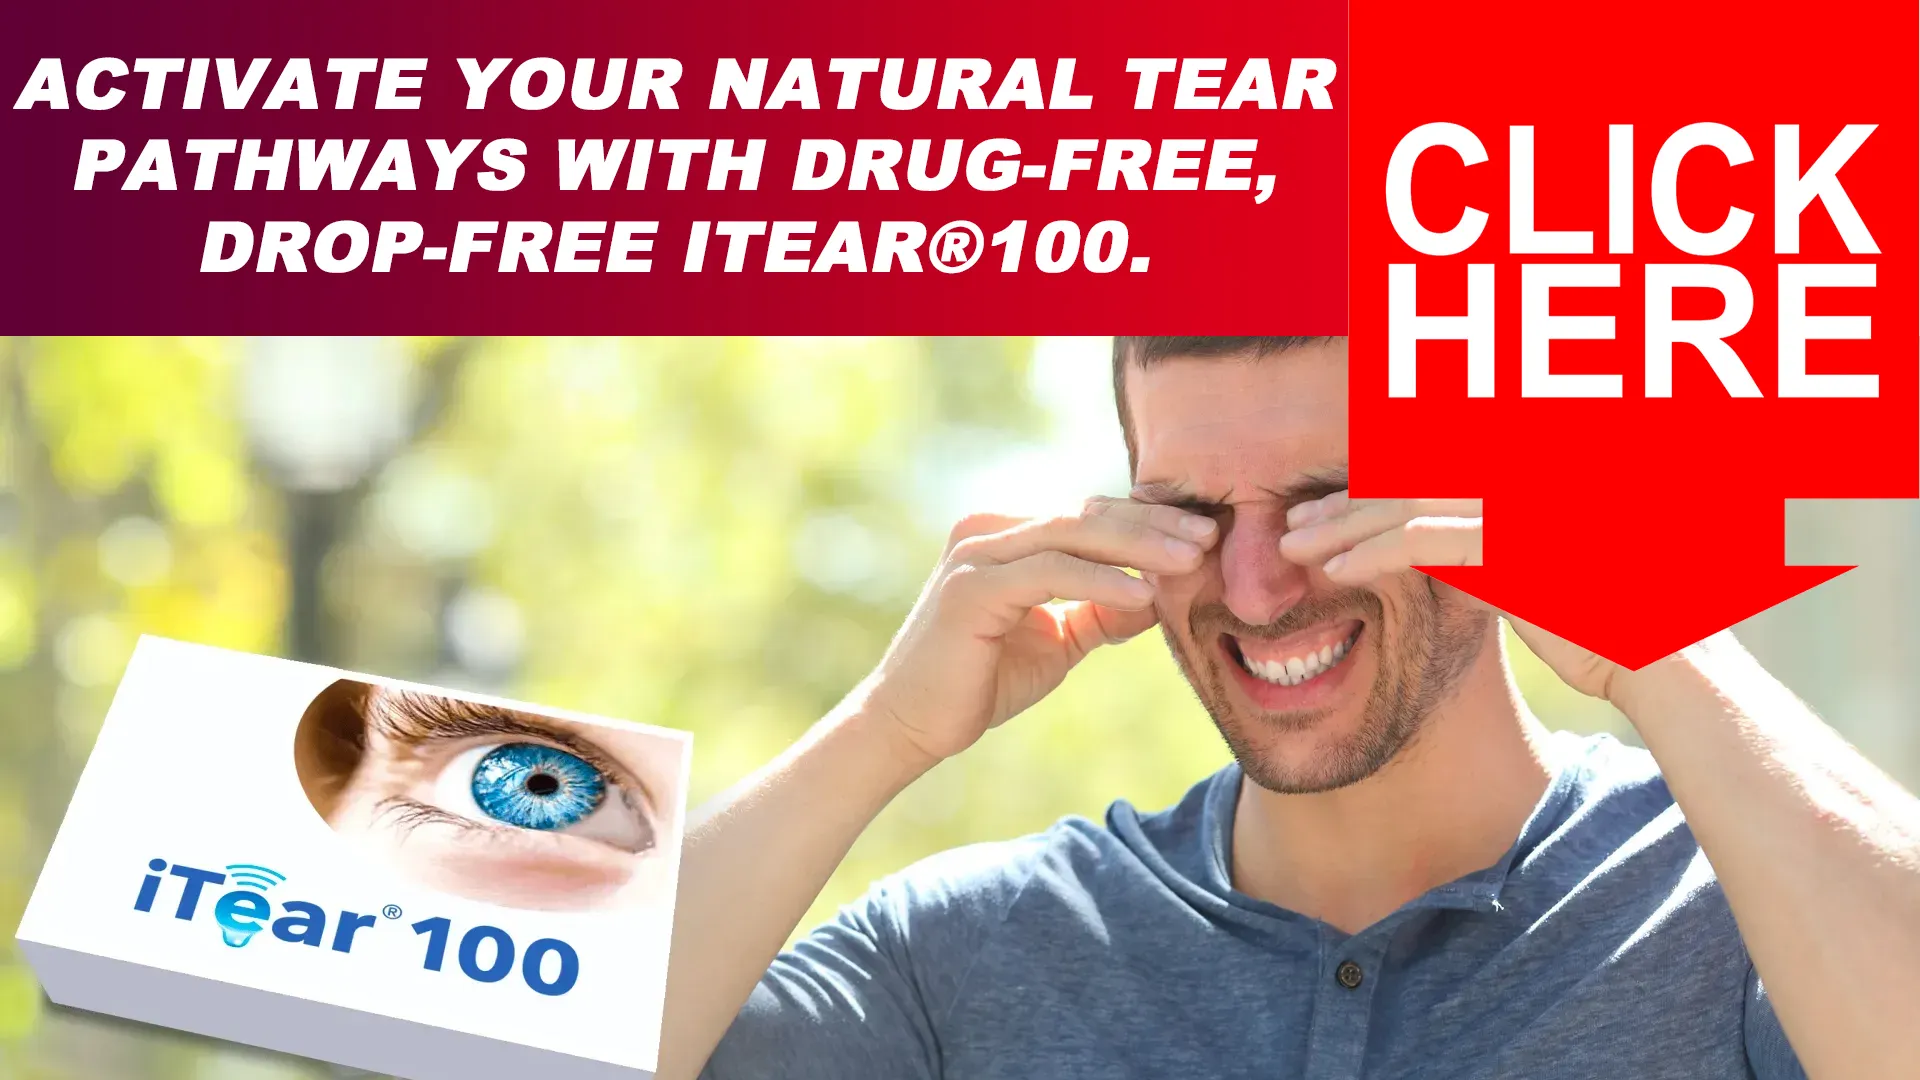 Tackling Dry Eye Syndrome with iTear100